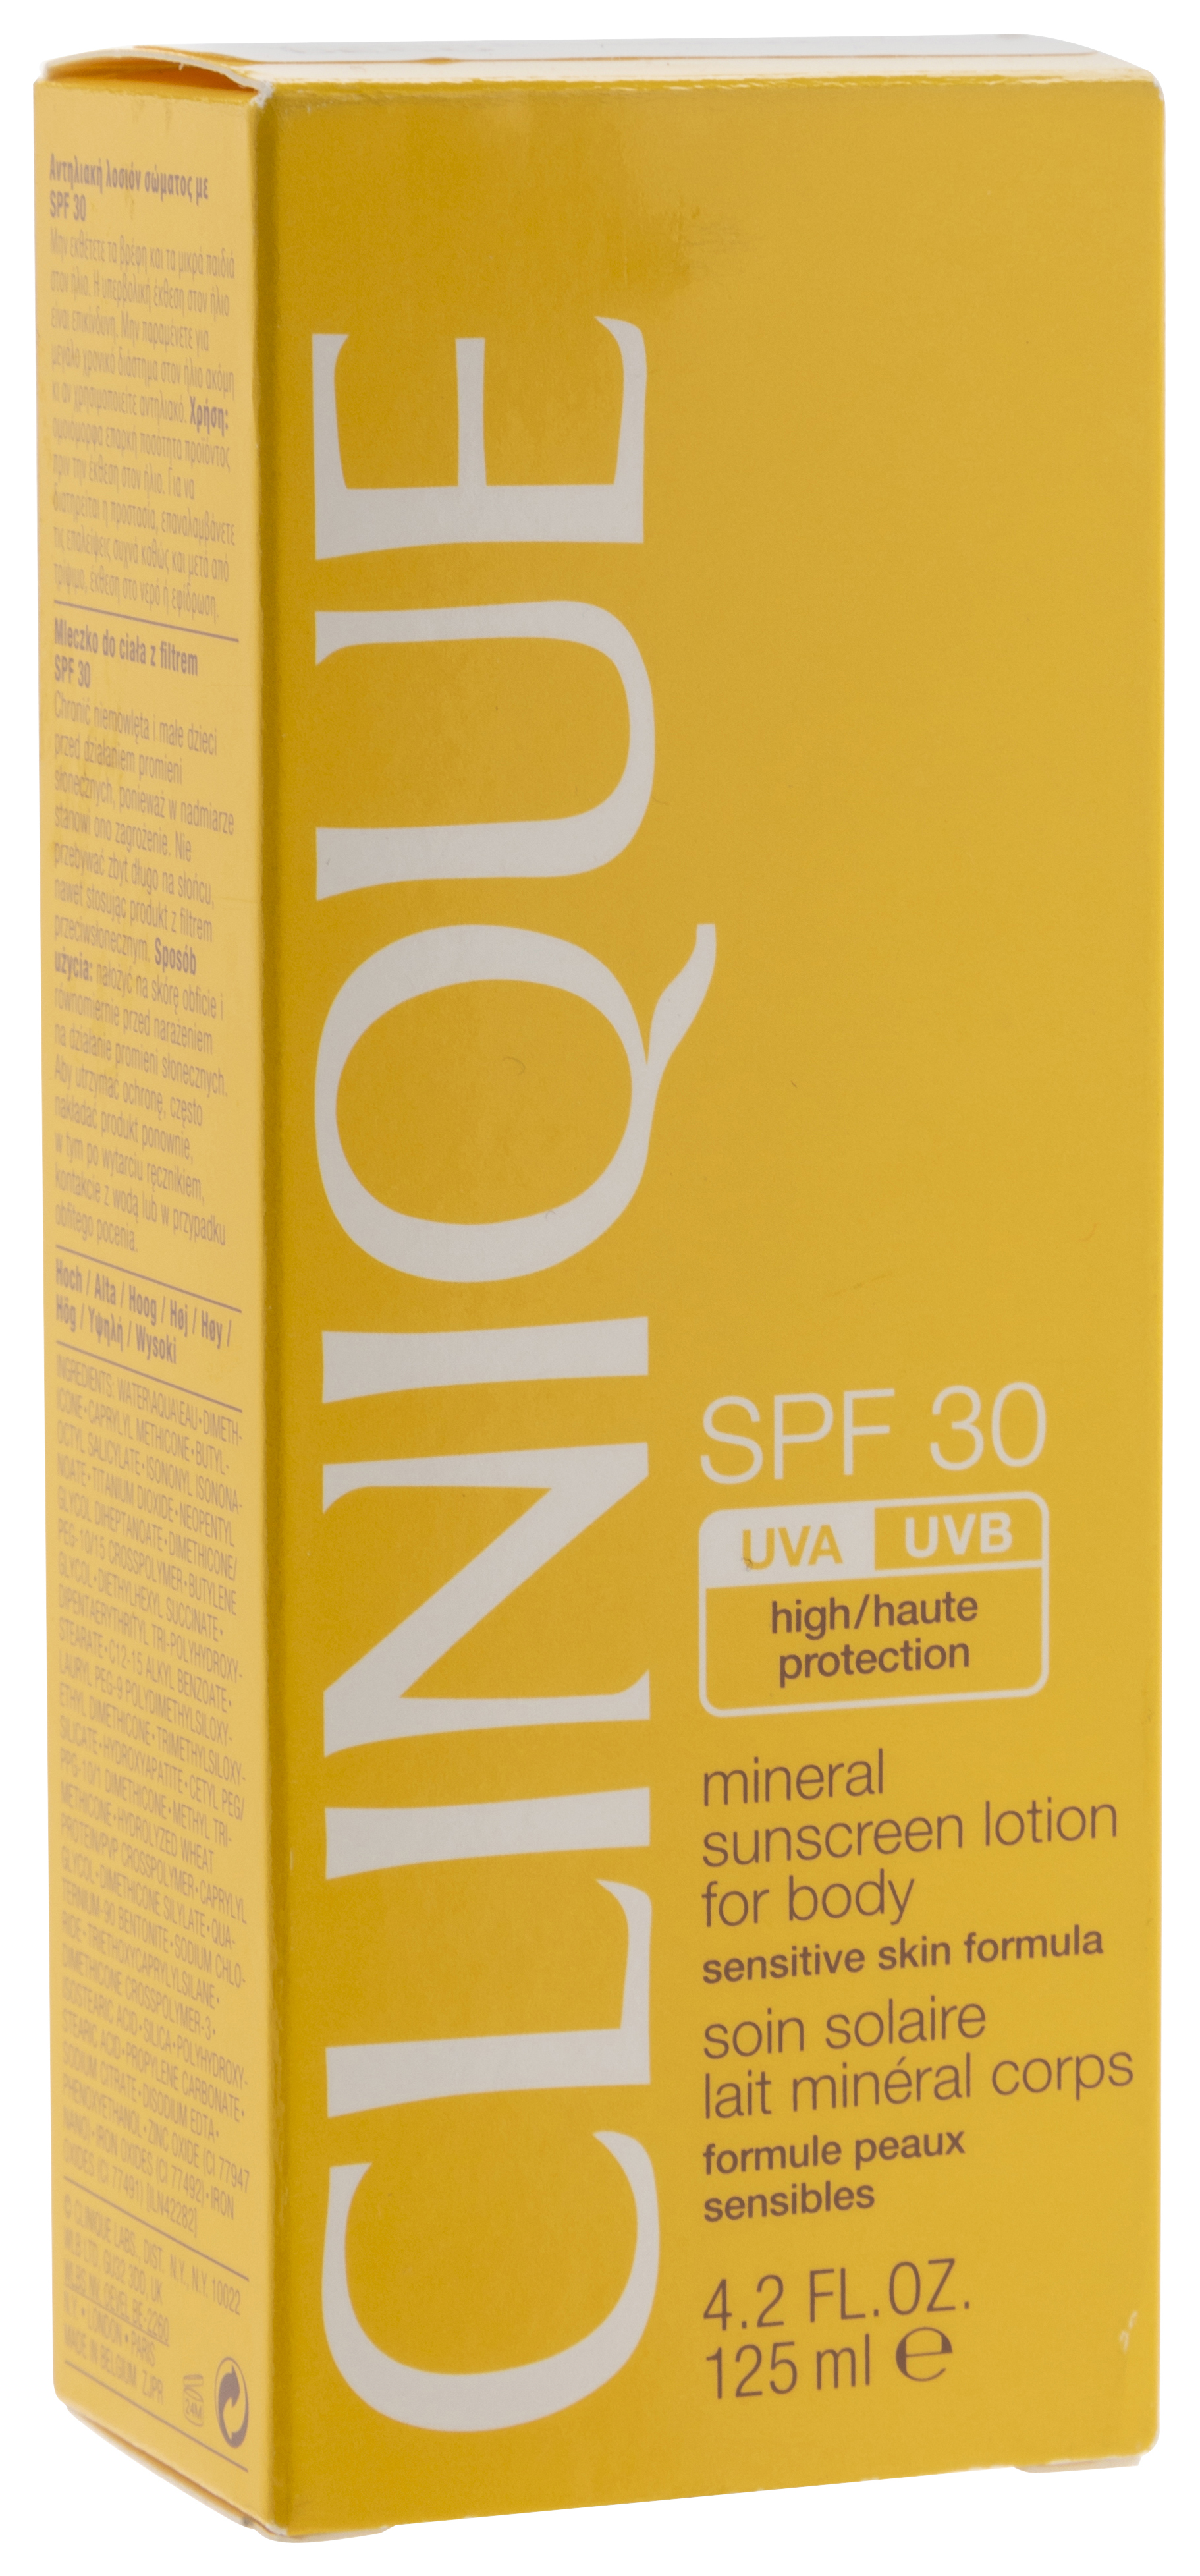 MINERAL SUNSCREEN LOTION FOR BODY SPF 30